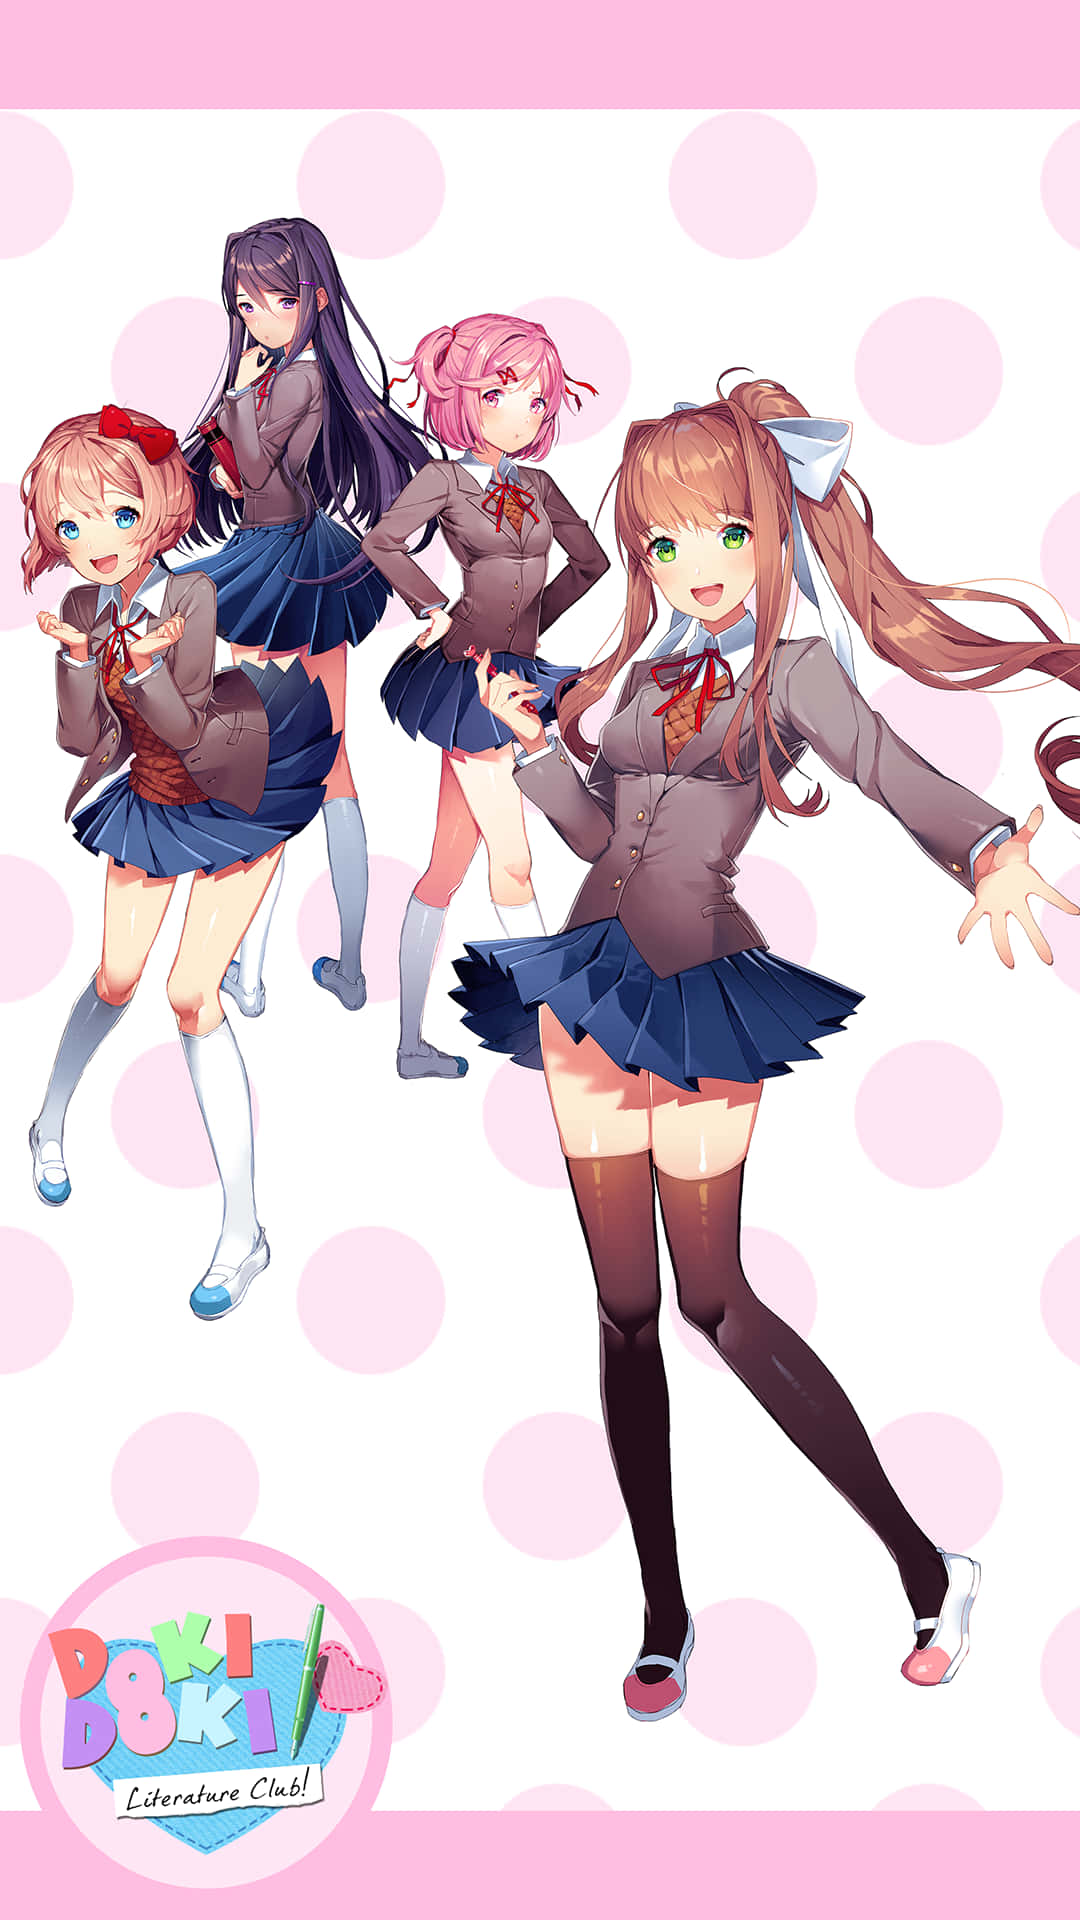 Join the Doki Doki family and explore the world of literature! Wallpaper